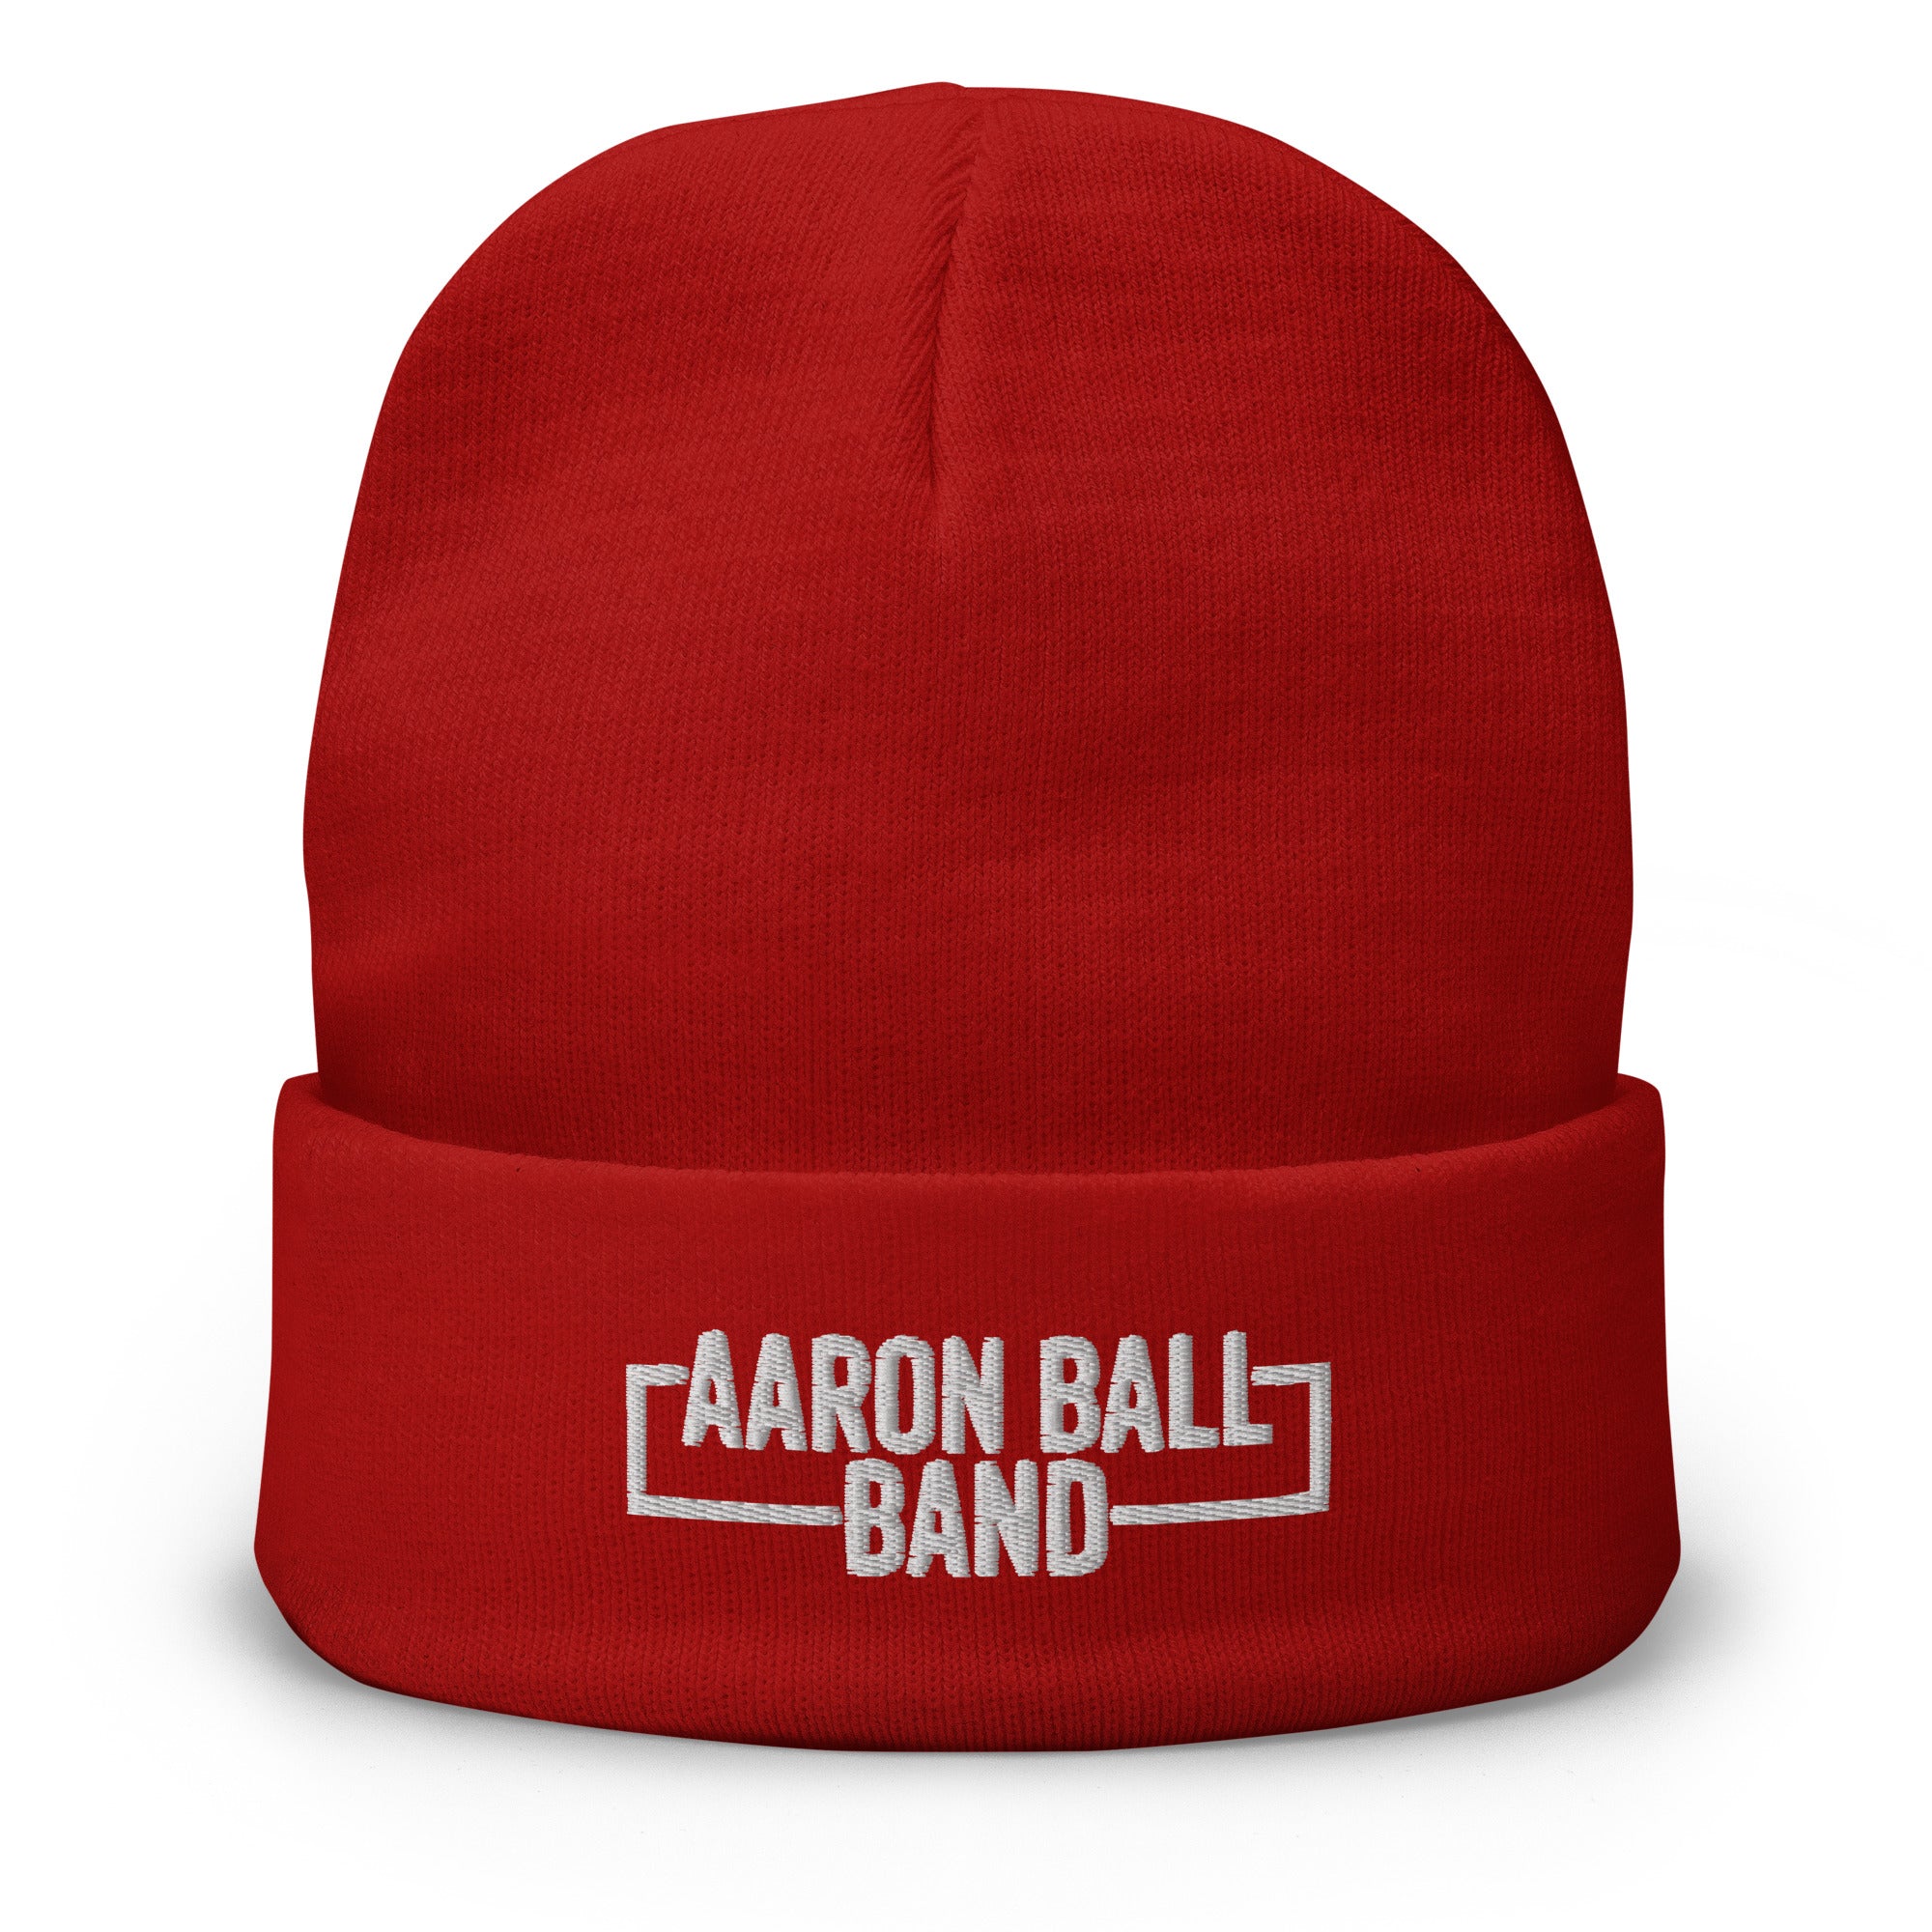 Aaron Ball Band - Embroidered Beanie